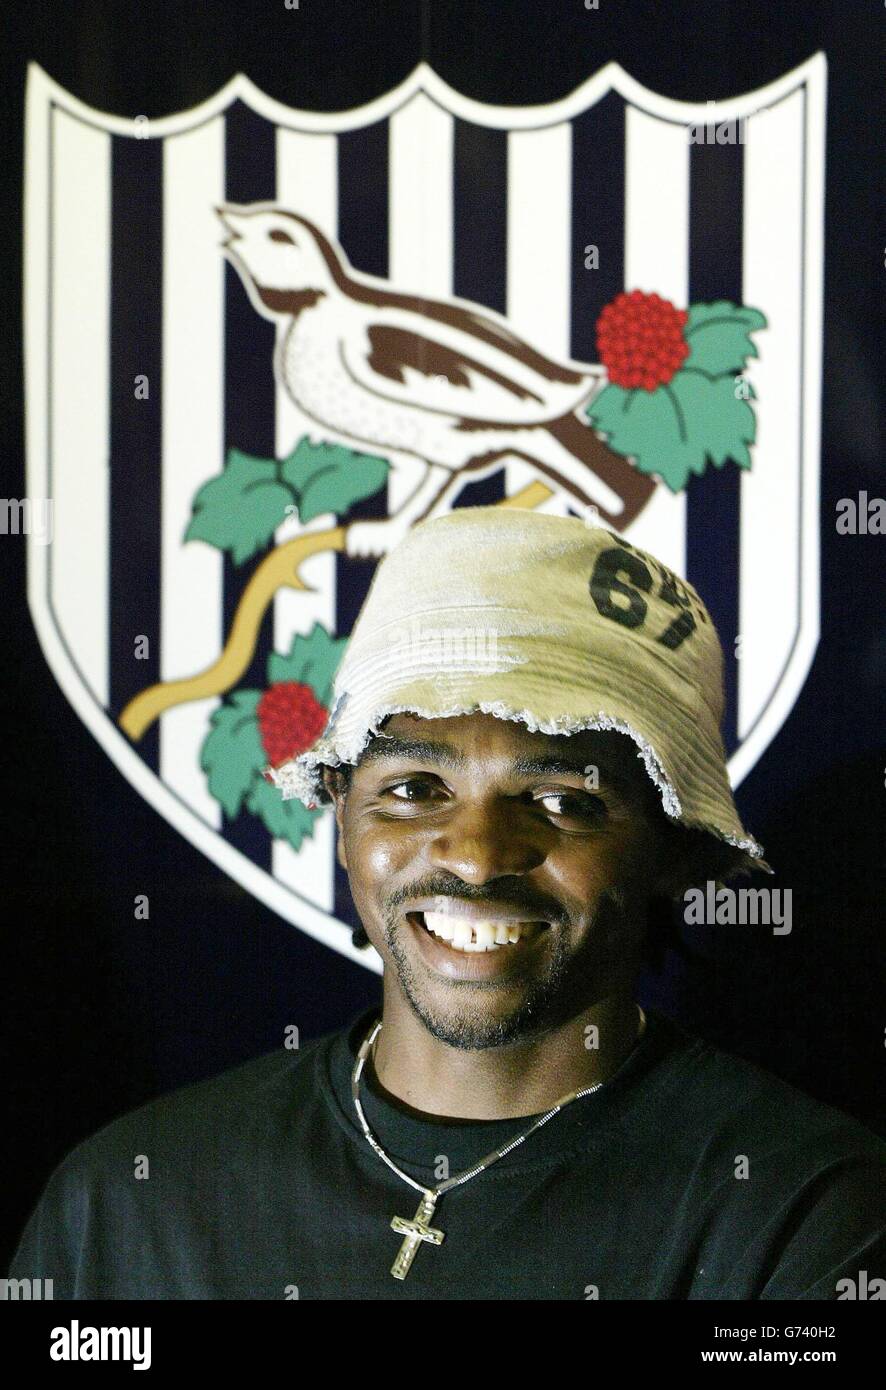 West Bromwich Albion's new signing Kanu at a press conference in West Bromwich. The former Nigeria International has signed a three year contract after leaving Arsenal on a free transfer. Stock Photo